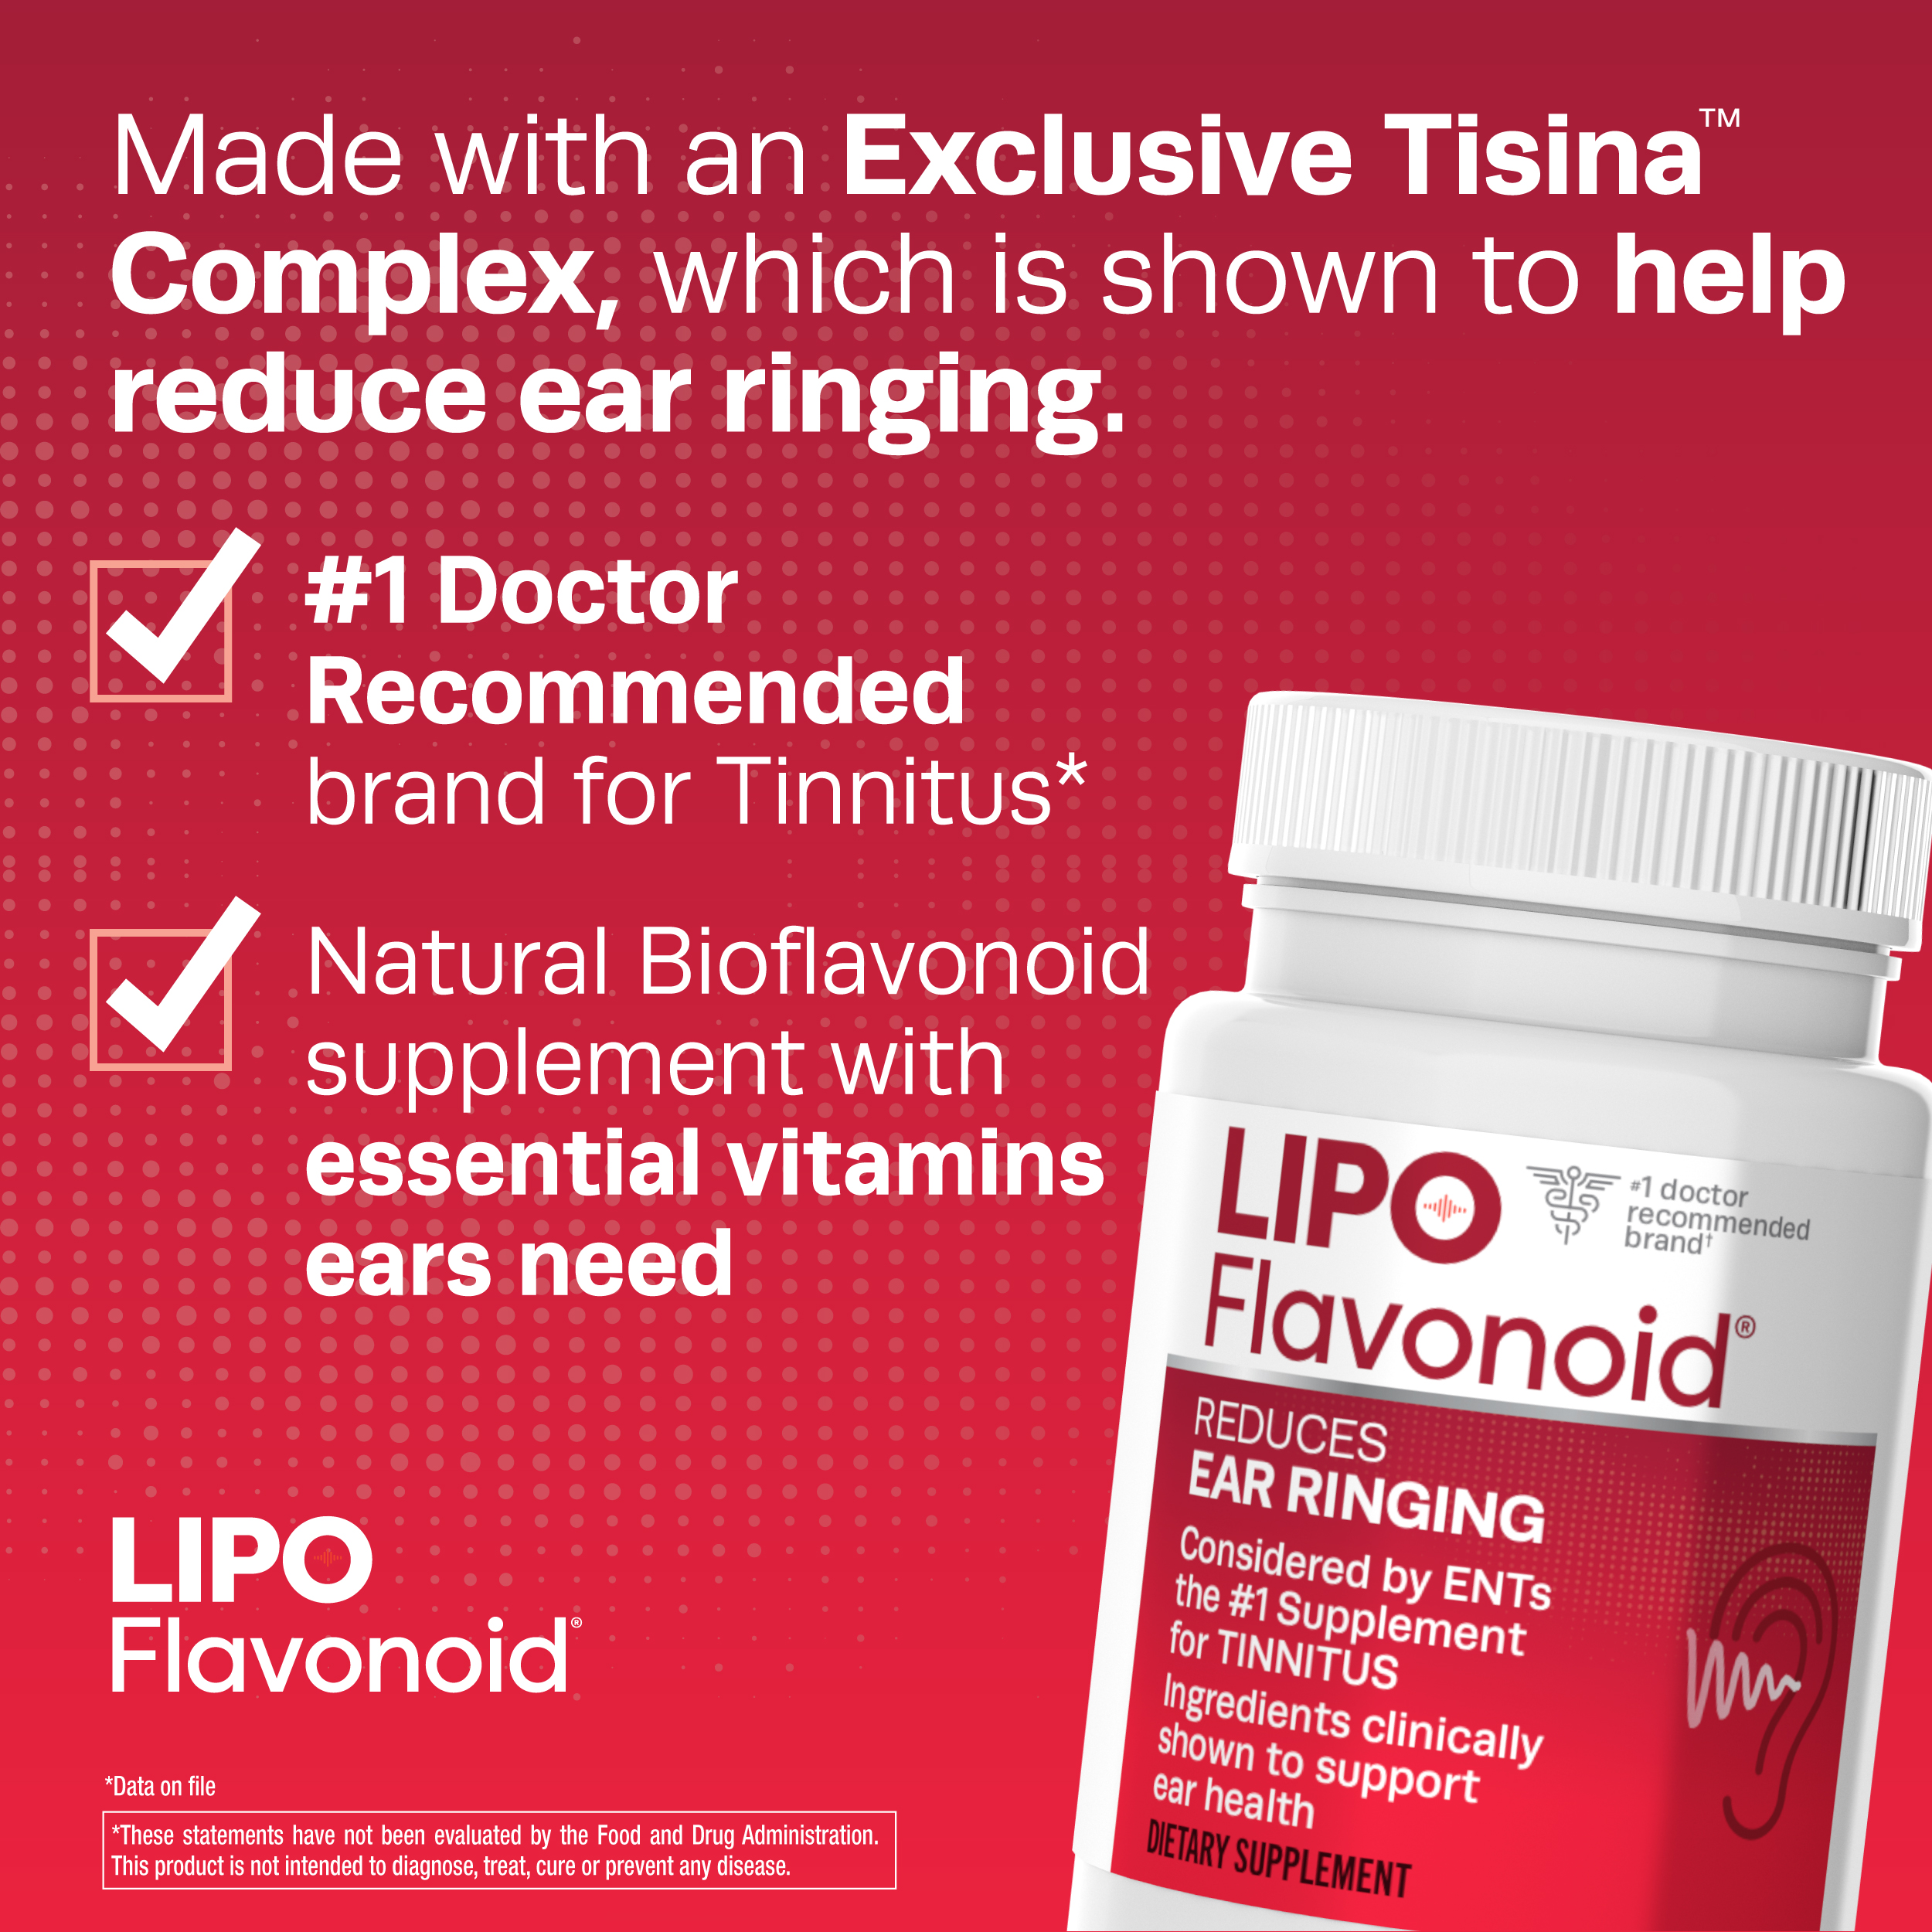 Lipo-Flavonoid Plus, Tinnitus Relief for Ear Ringing, Health Supplement, 500 Caplets, Value Size (Packaging May Vary) - image 5 of 12